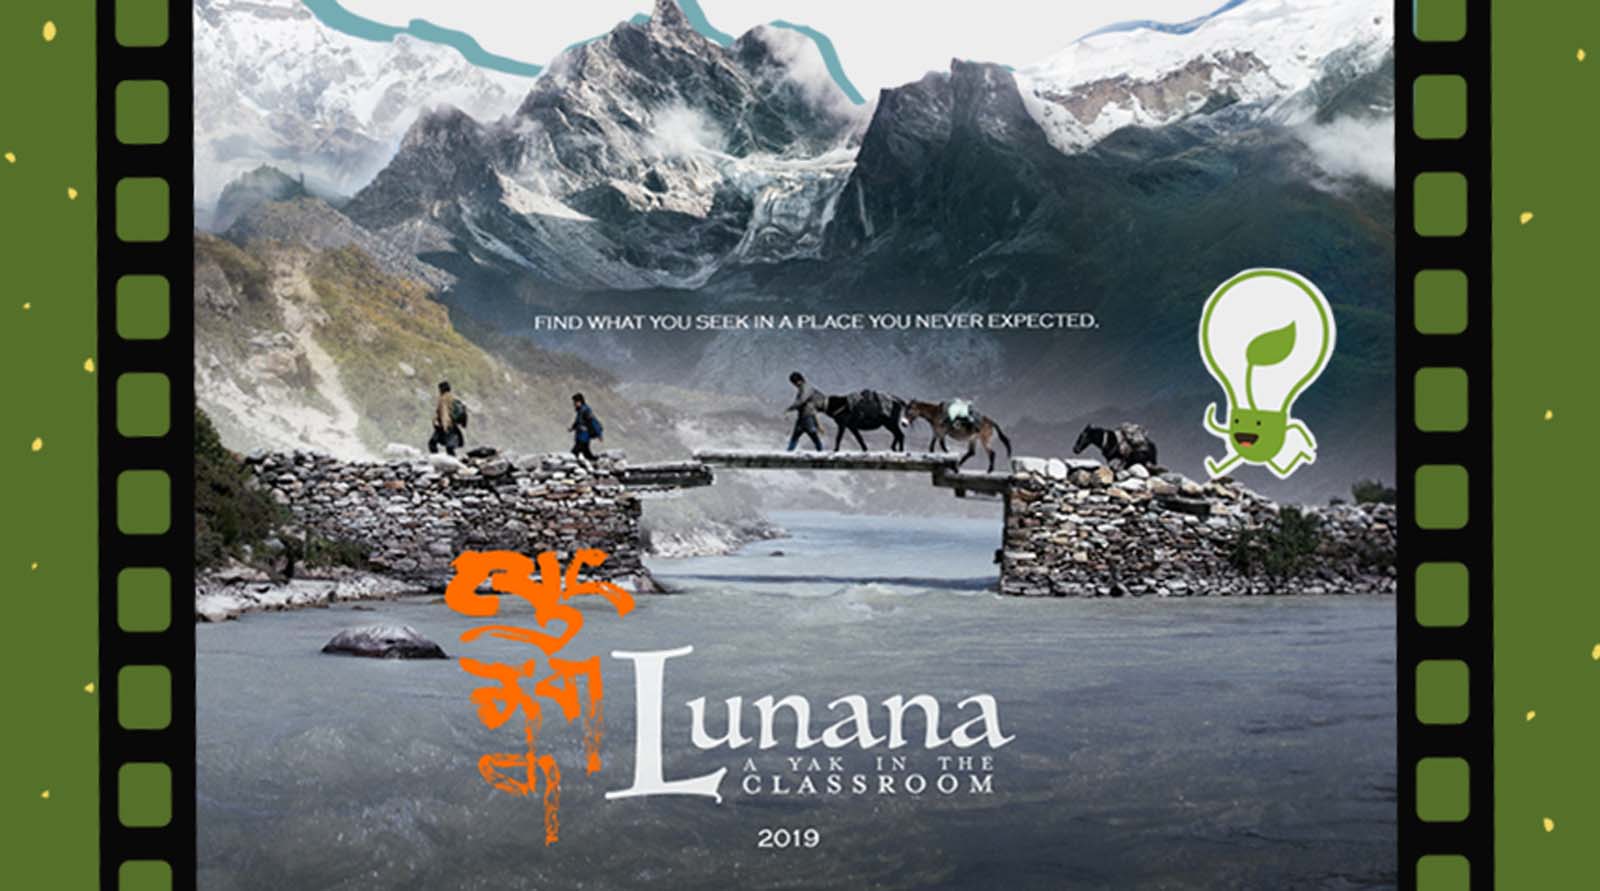 Film Review: Lunana – Finding happiness in a dark valley